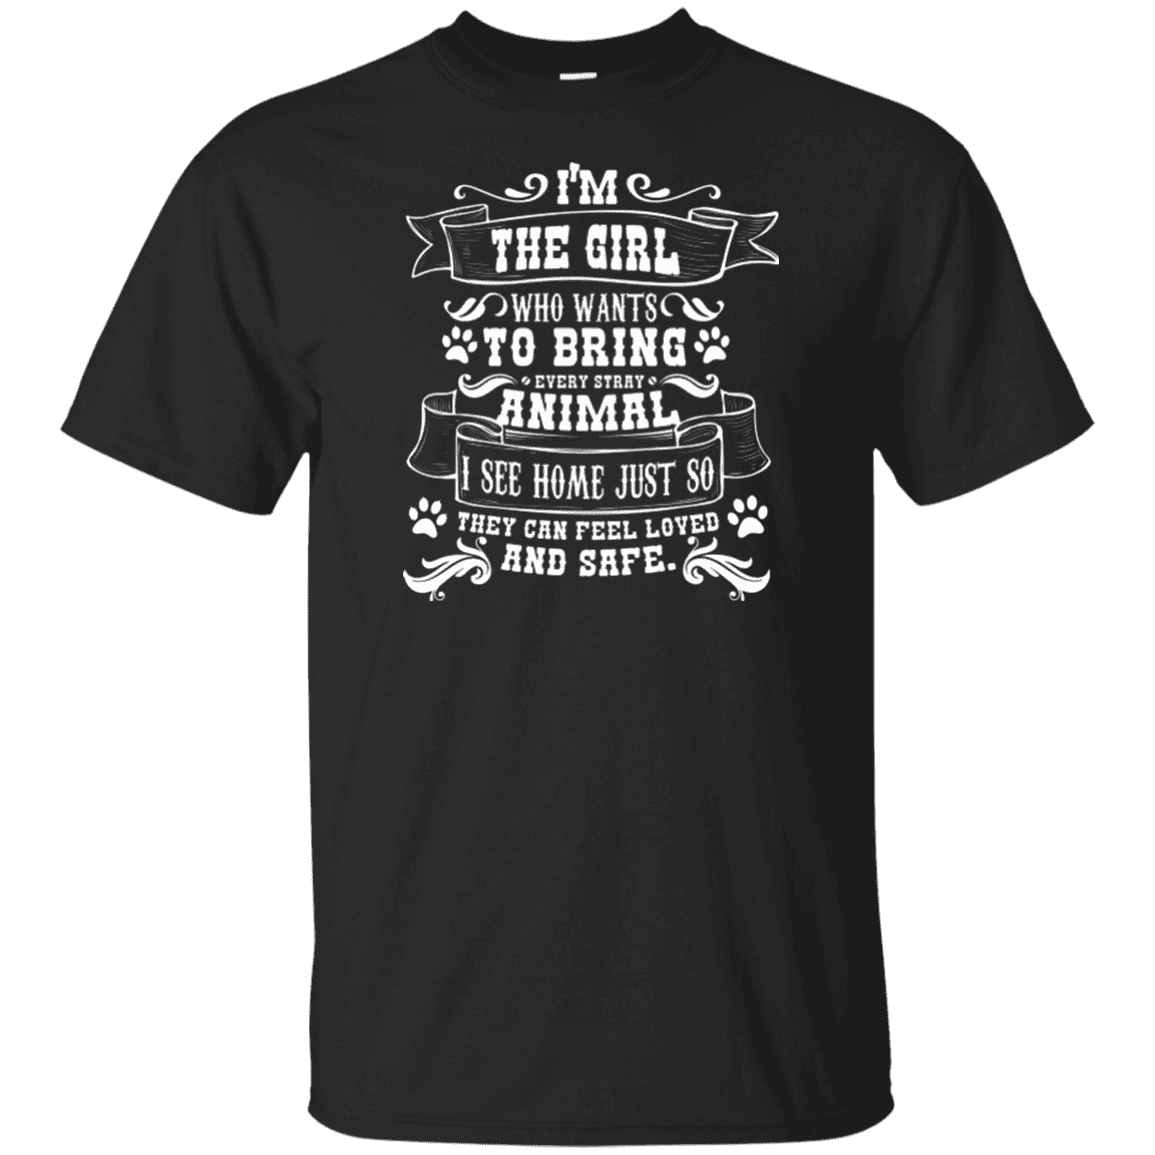 I'm The Girl - Youth T Shirt.